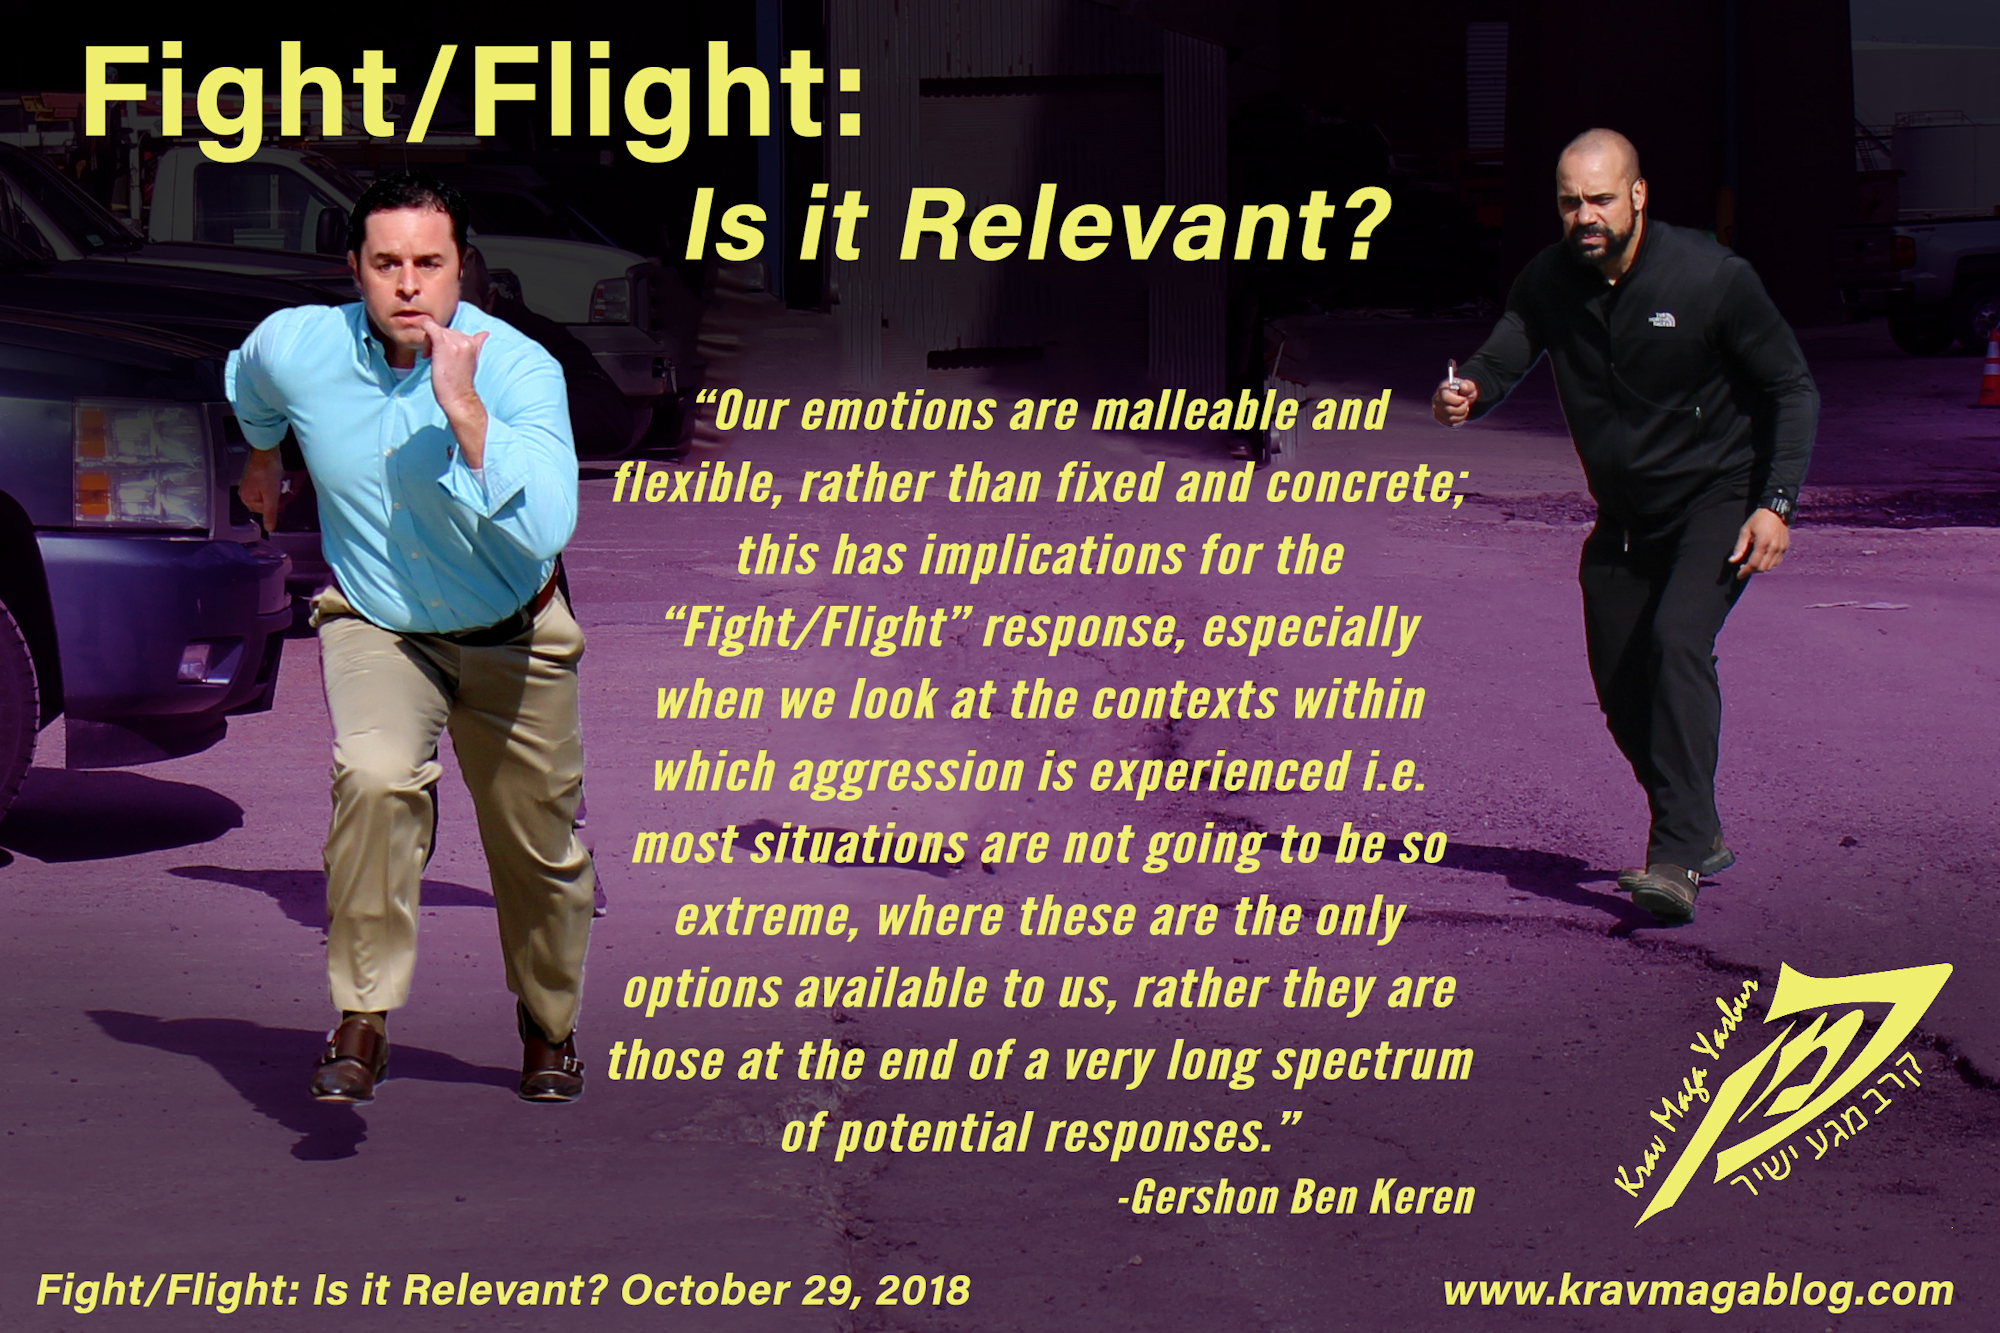 Blog About Fight/Flight: Is it Relevant?